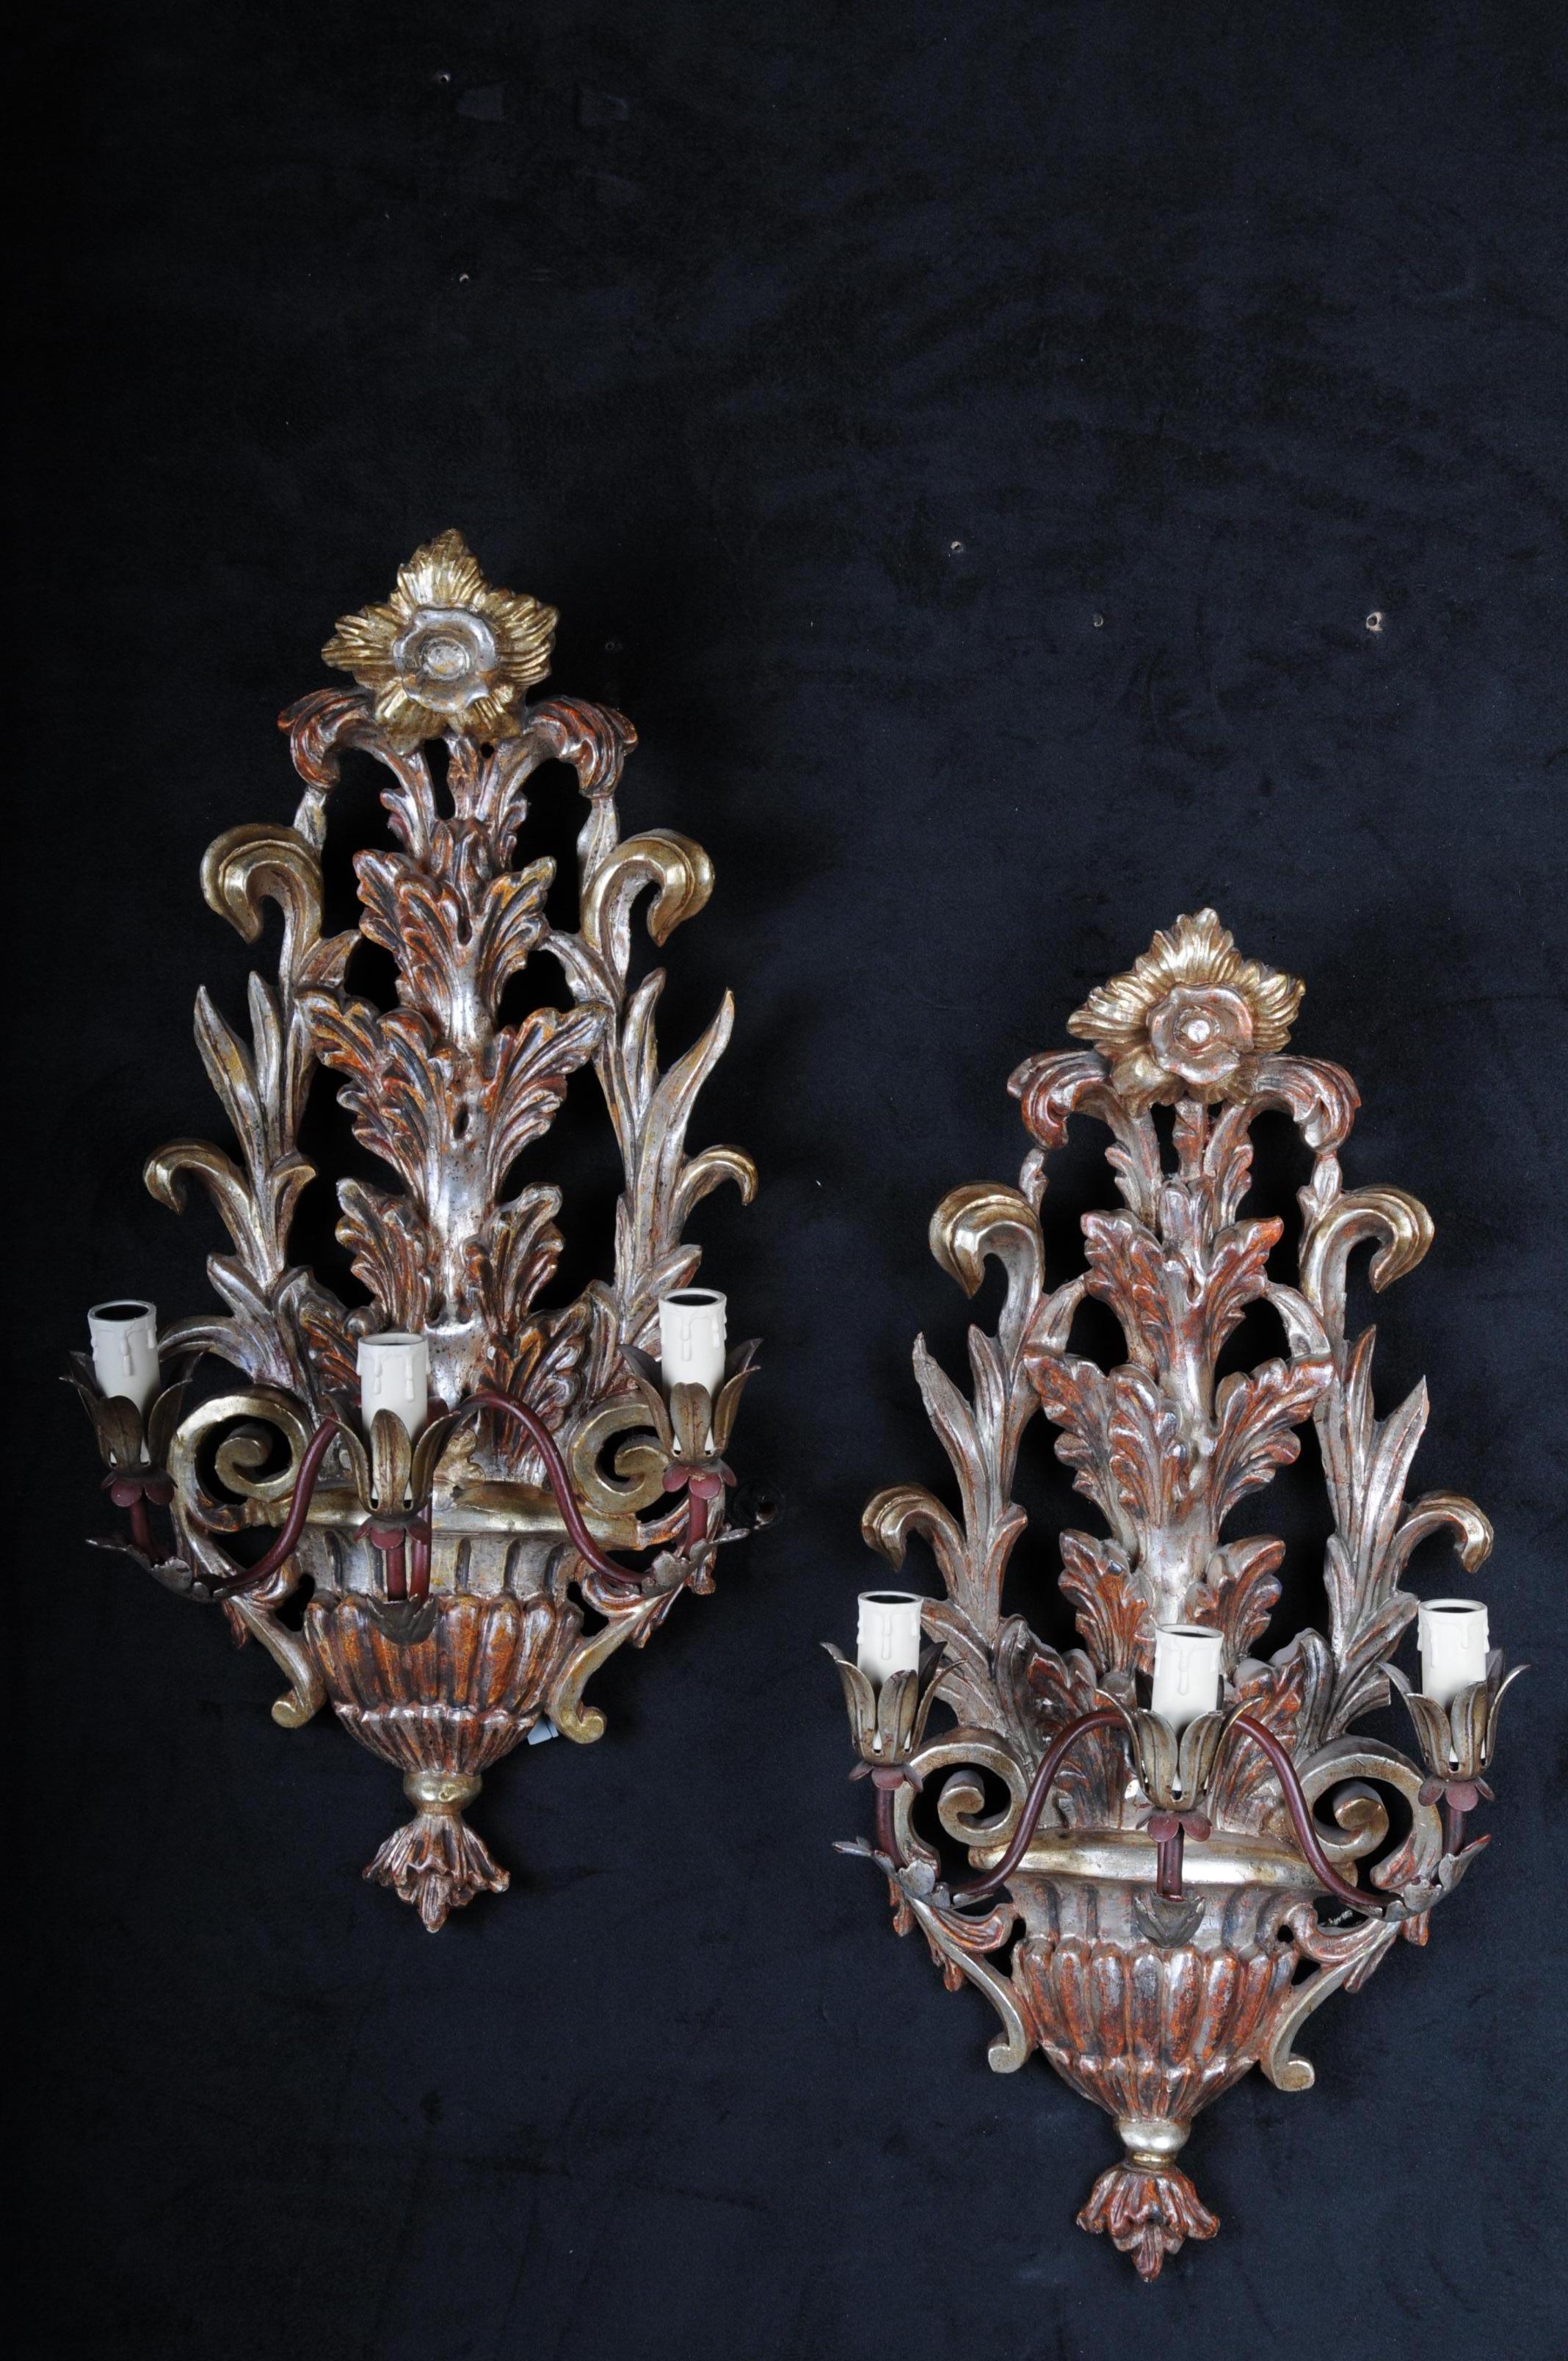 20th century pair of Venetian wall sconces, Italy

Solid wood, carved, colored and silver plated. 3 arms each, electrified.
Richly ornamented and ornate body.

(F-108).